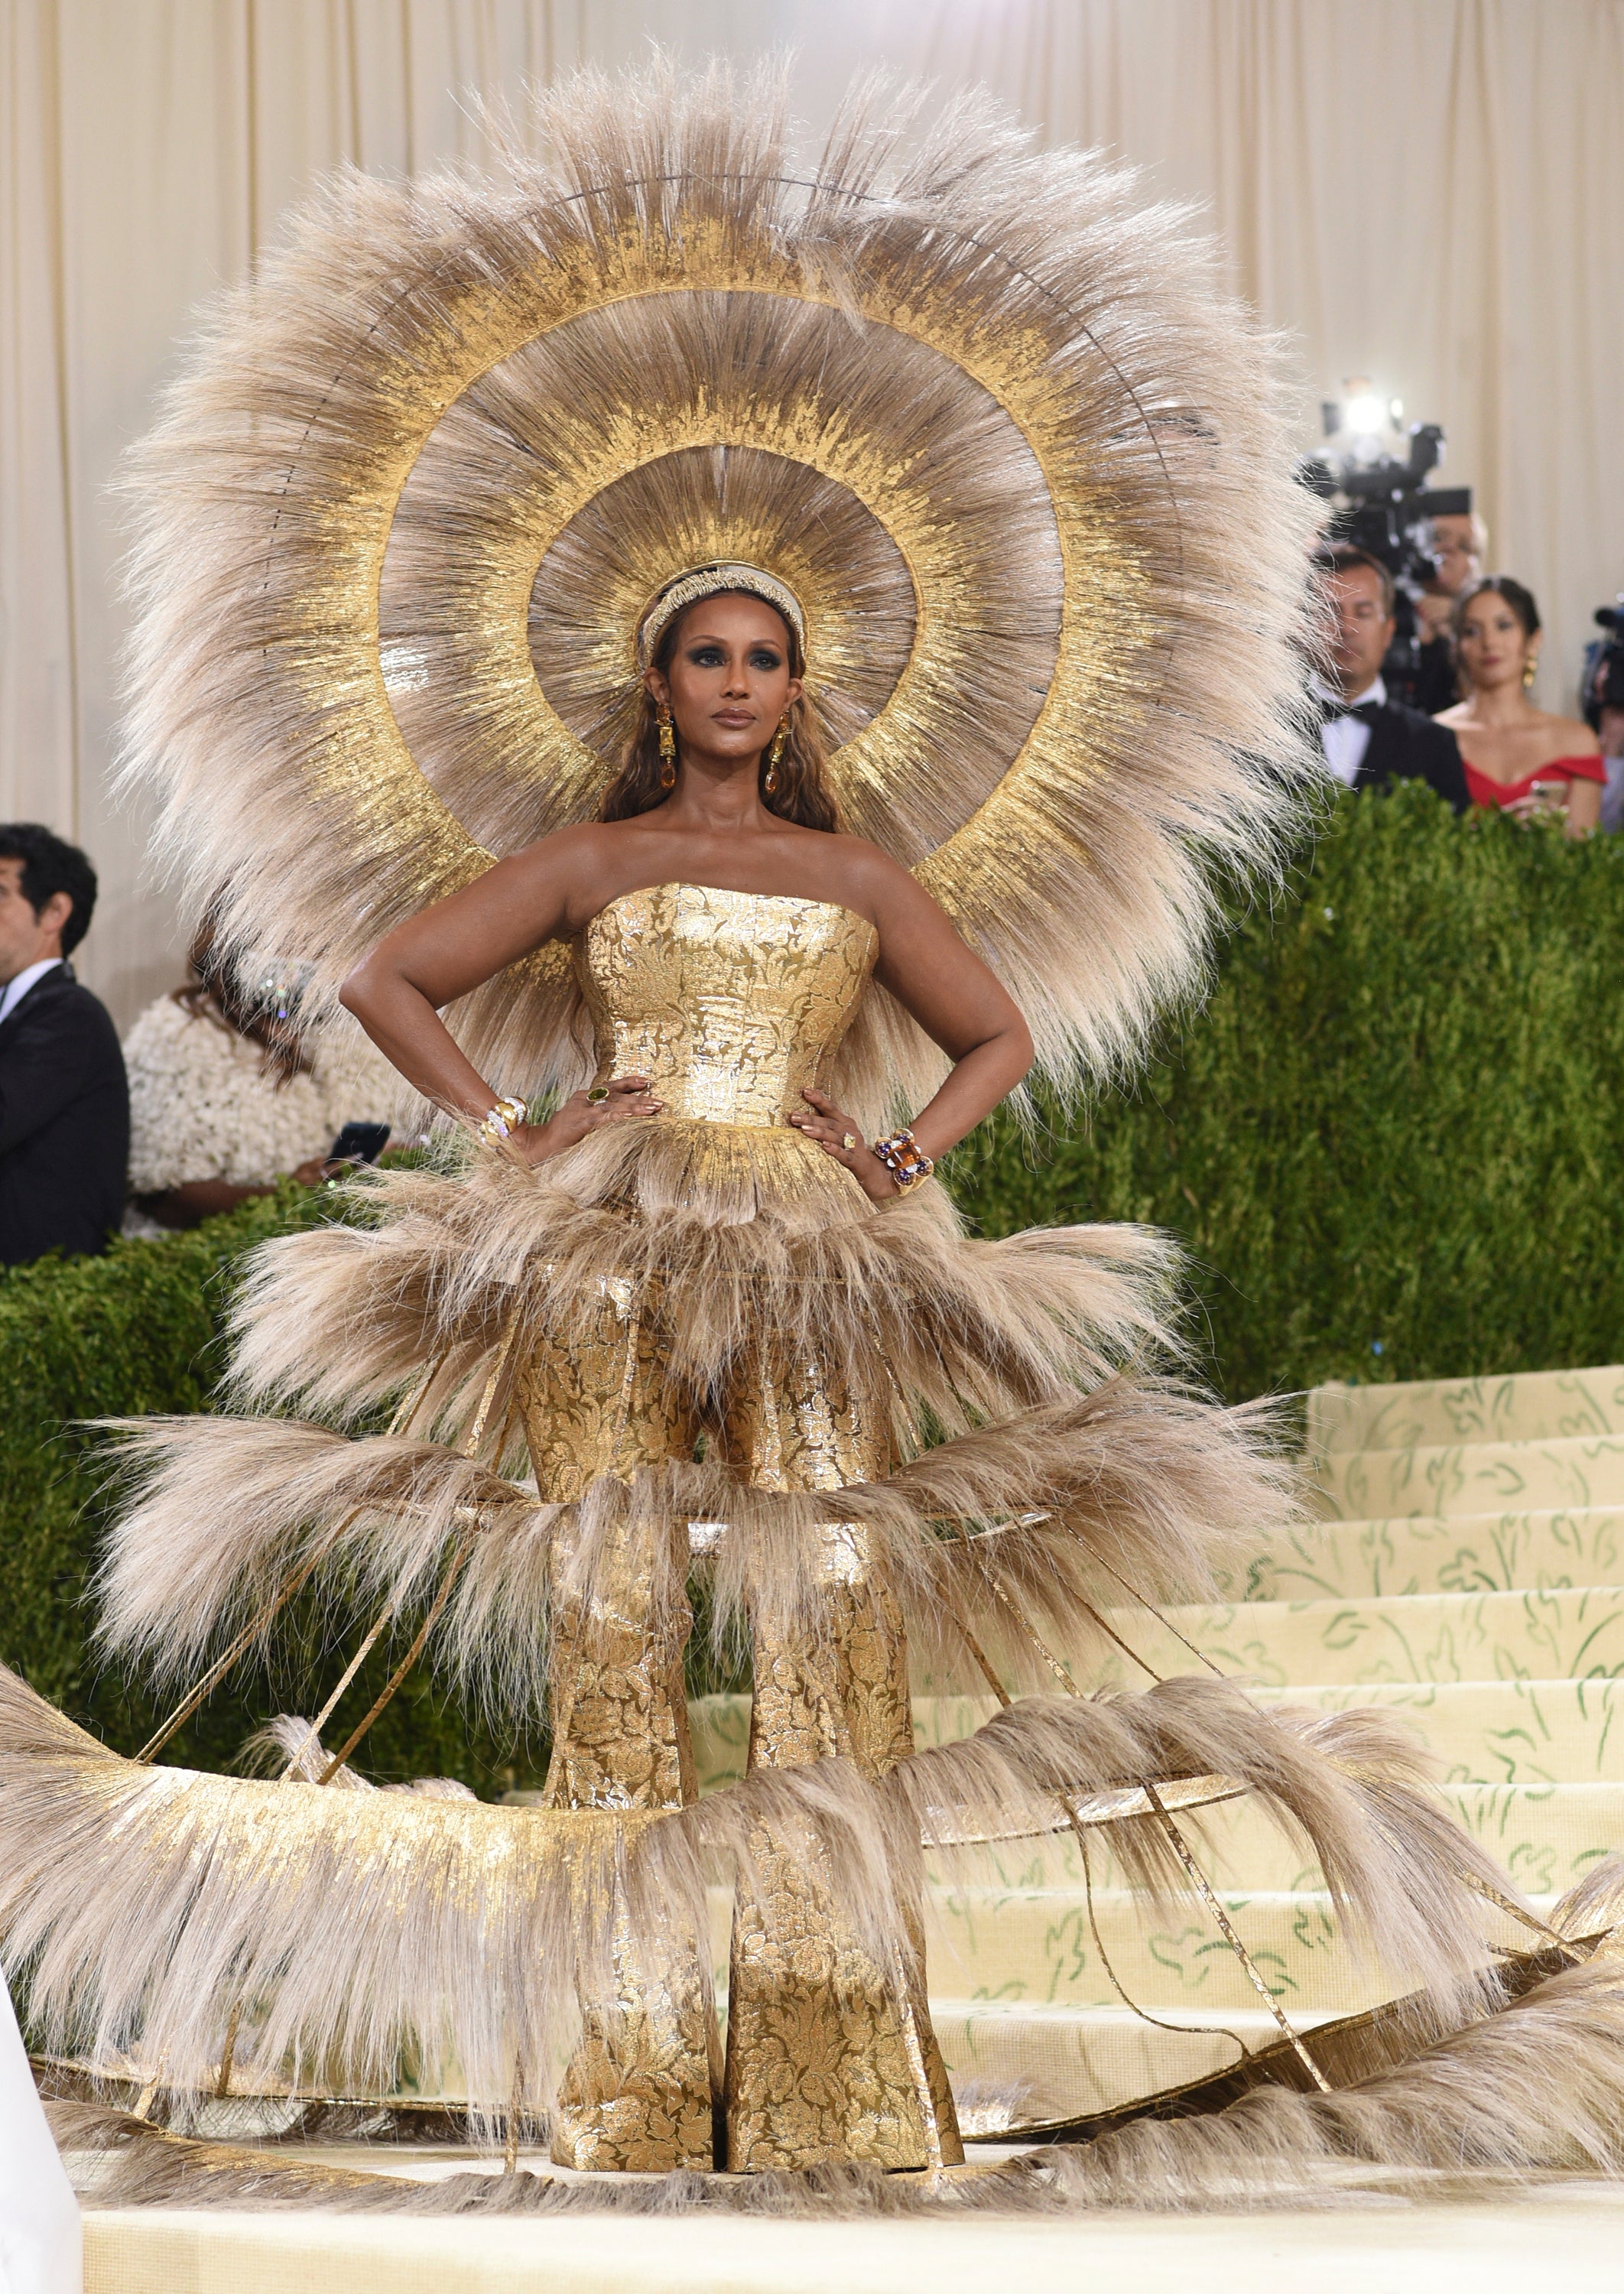 Iman wore an elaborate feather outfit at the Met Gala (Evan Agostini/Invision/AP)